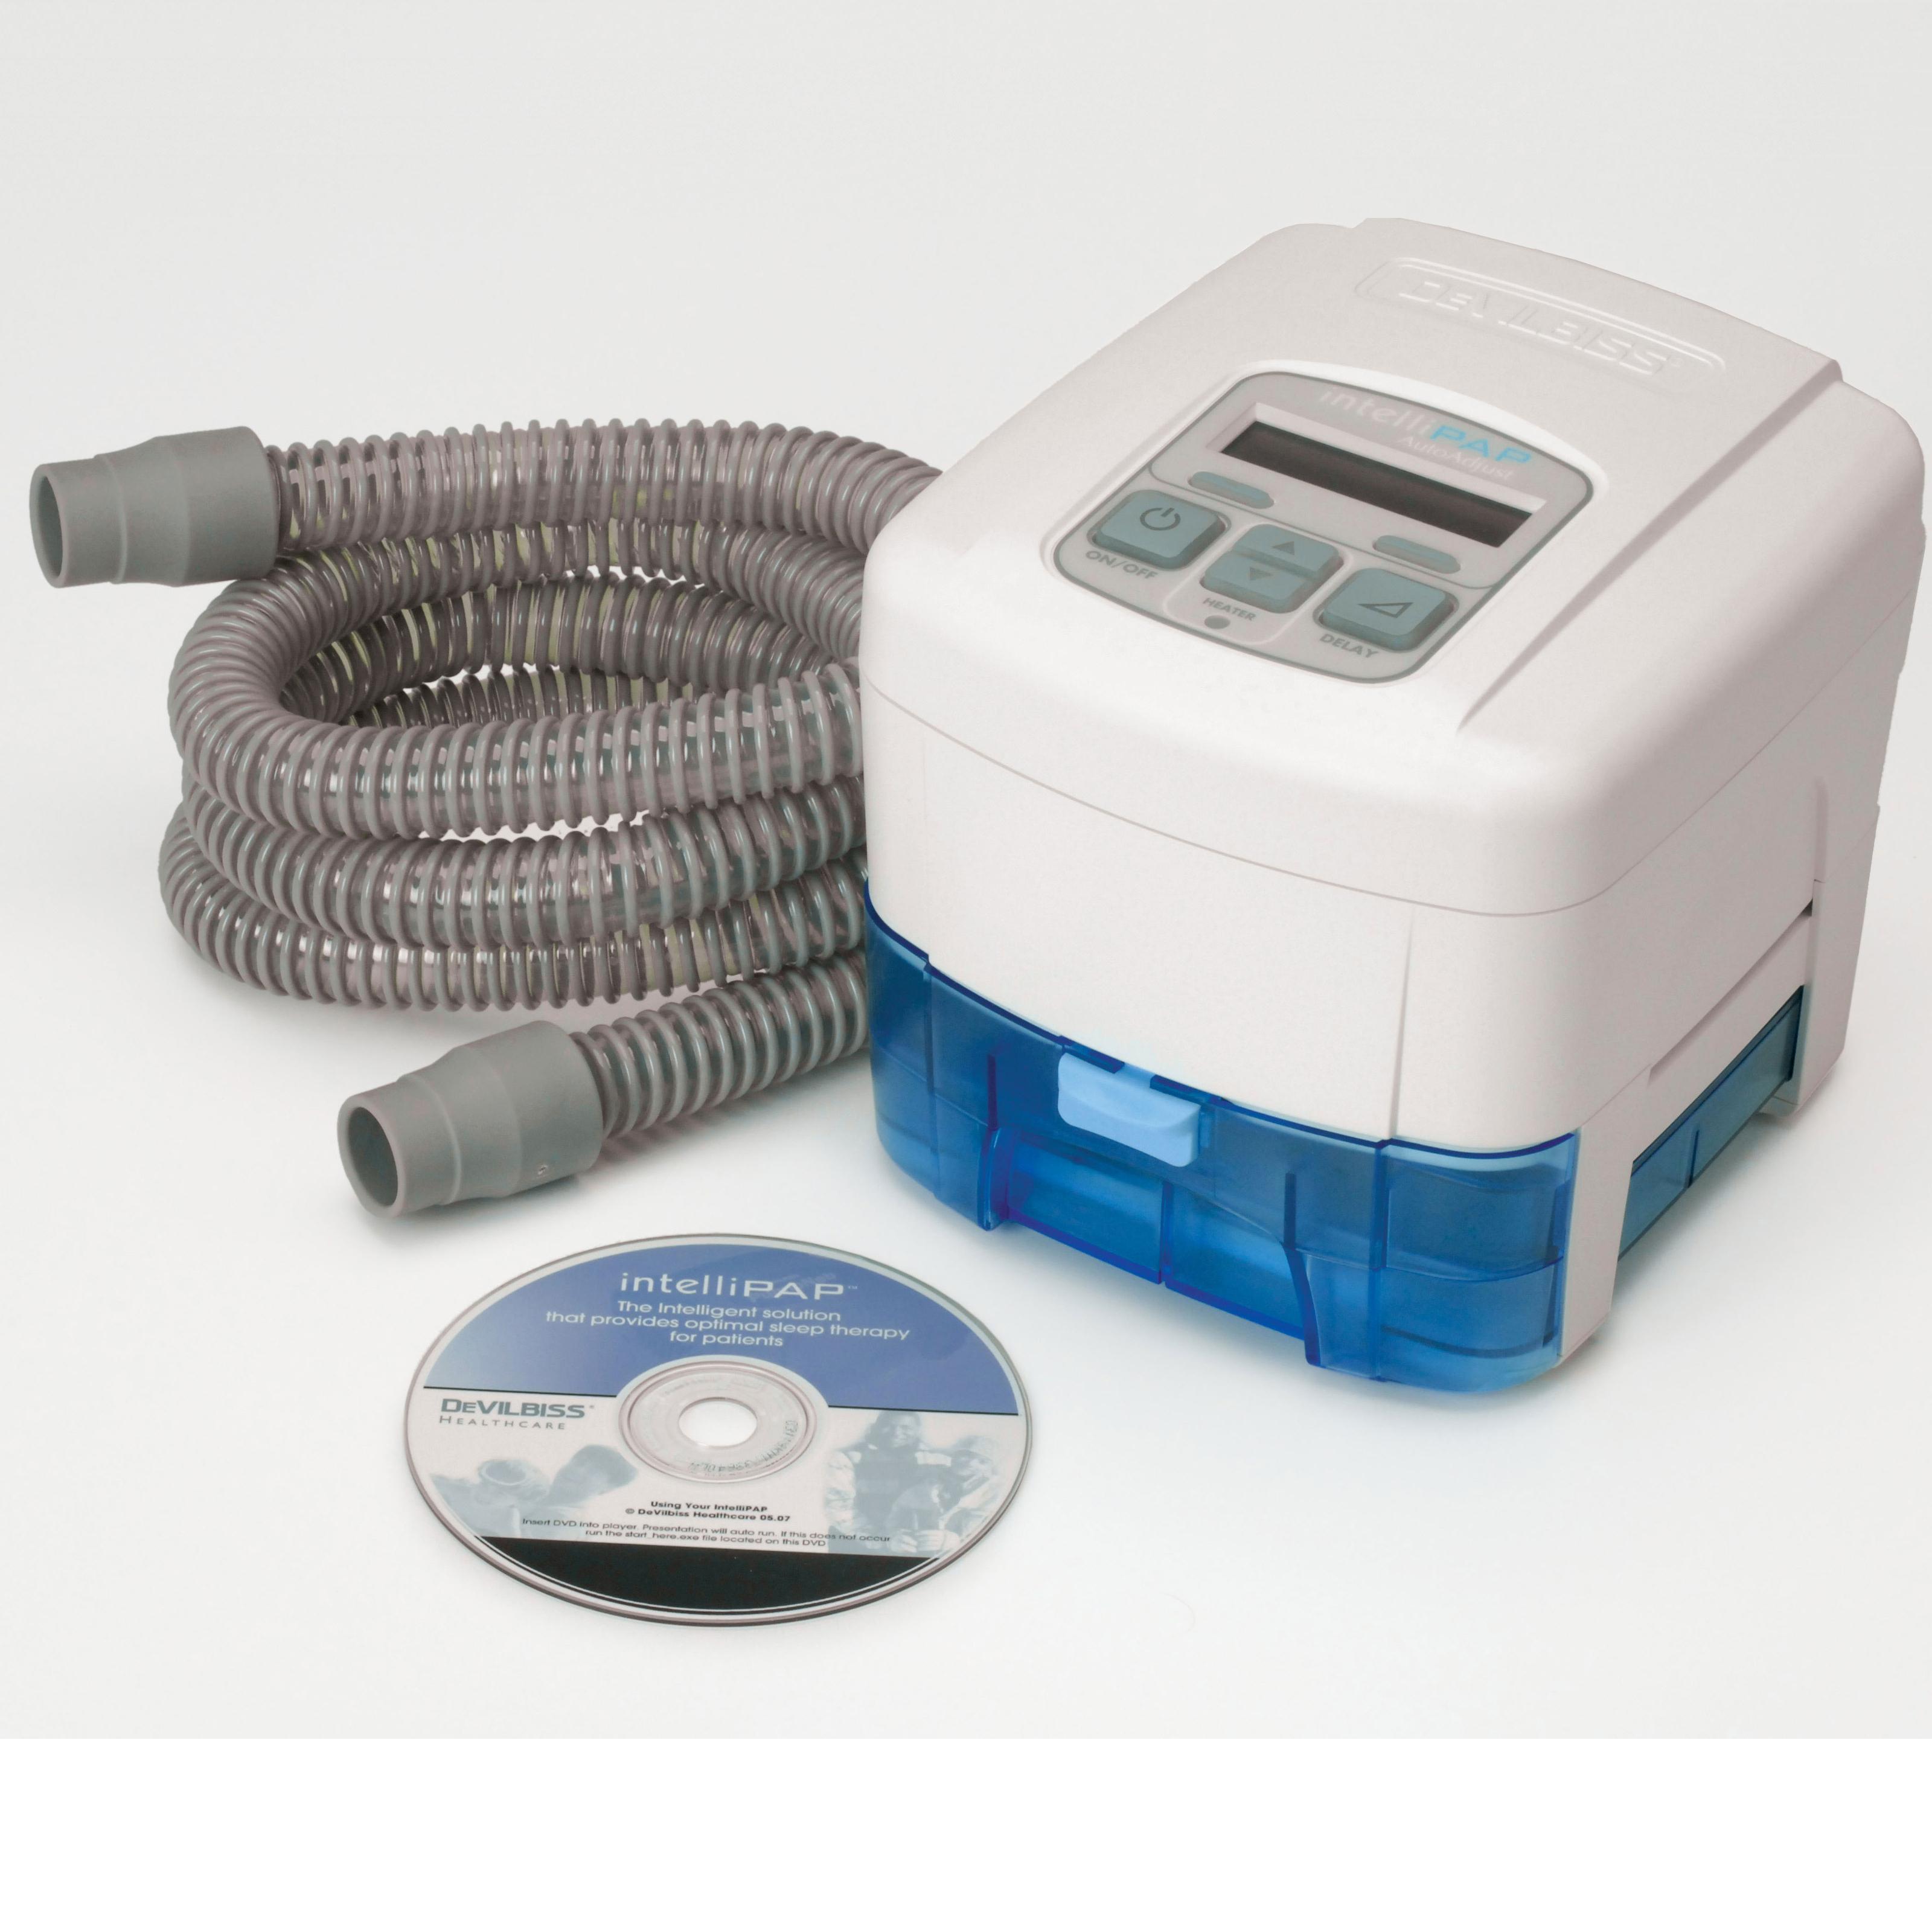 DeVilbiss CPAP : # DV51D-HH IntelliPAP Standard with Humidifier-/catalog/cpap/devilbiss/InteliPAPauto-04